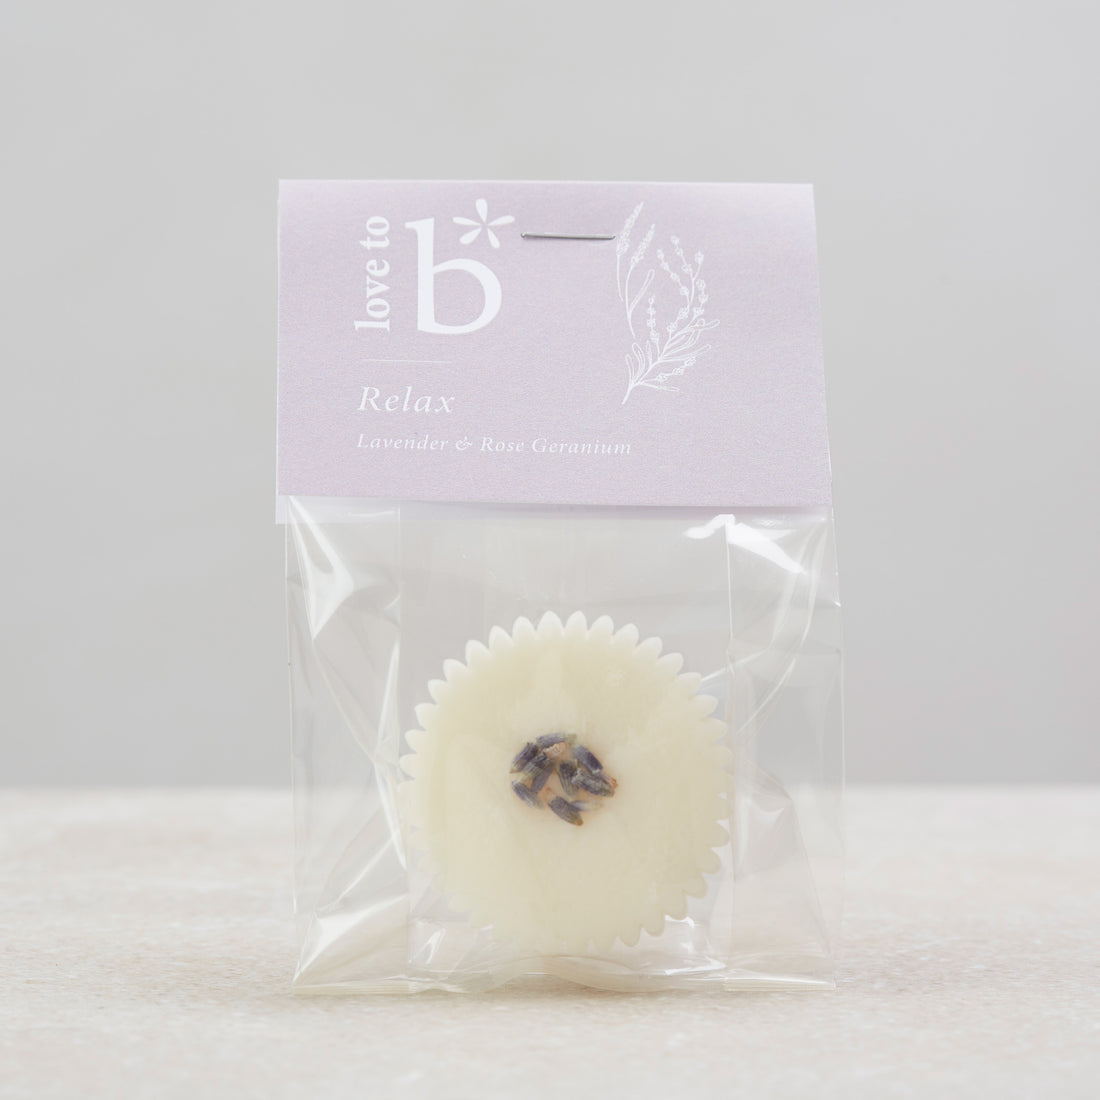 Love to b Natural Skincare Relaxing Lavender Bath Melt